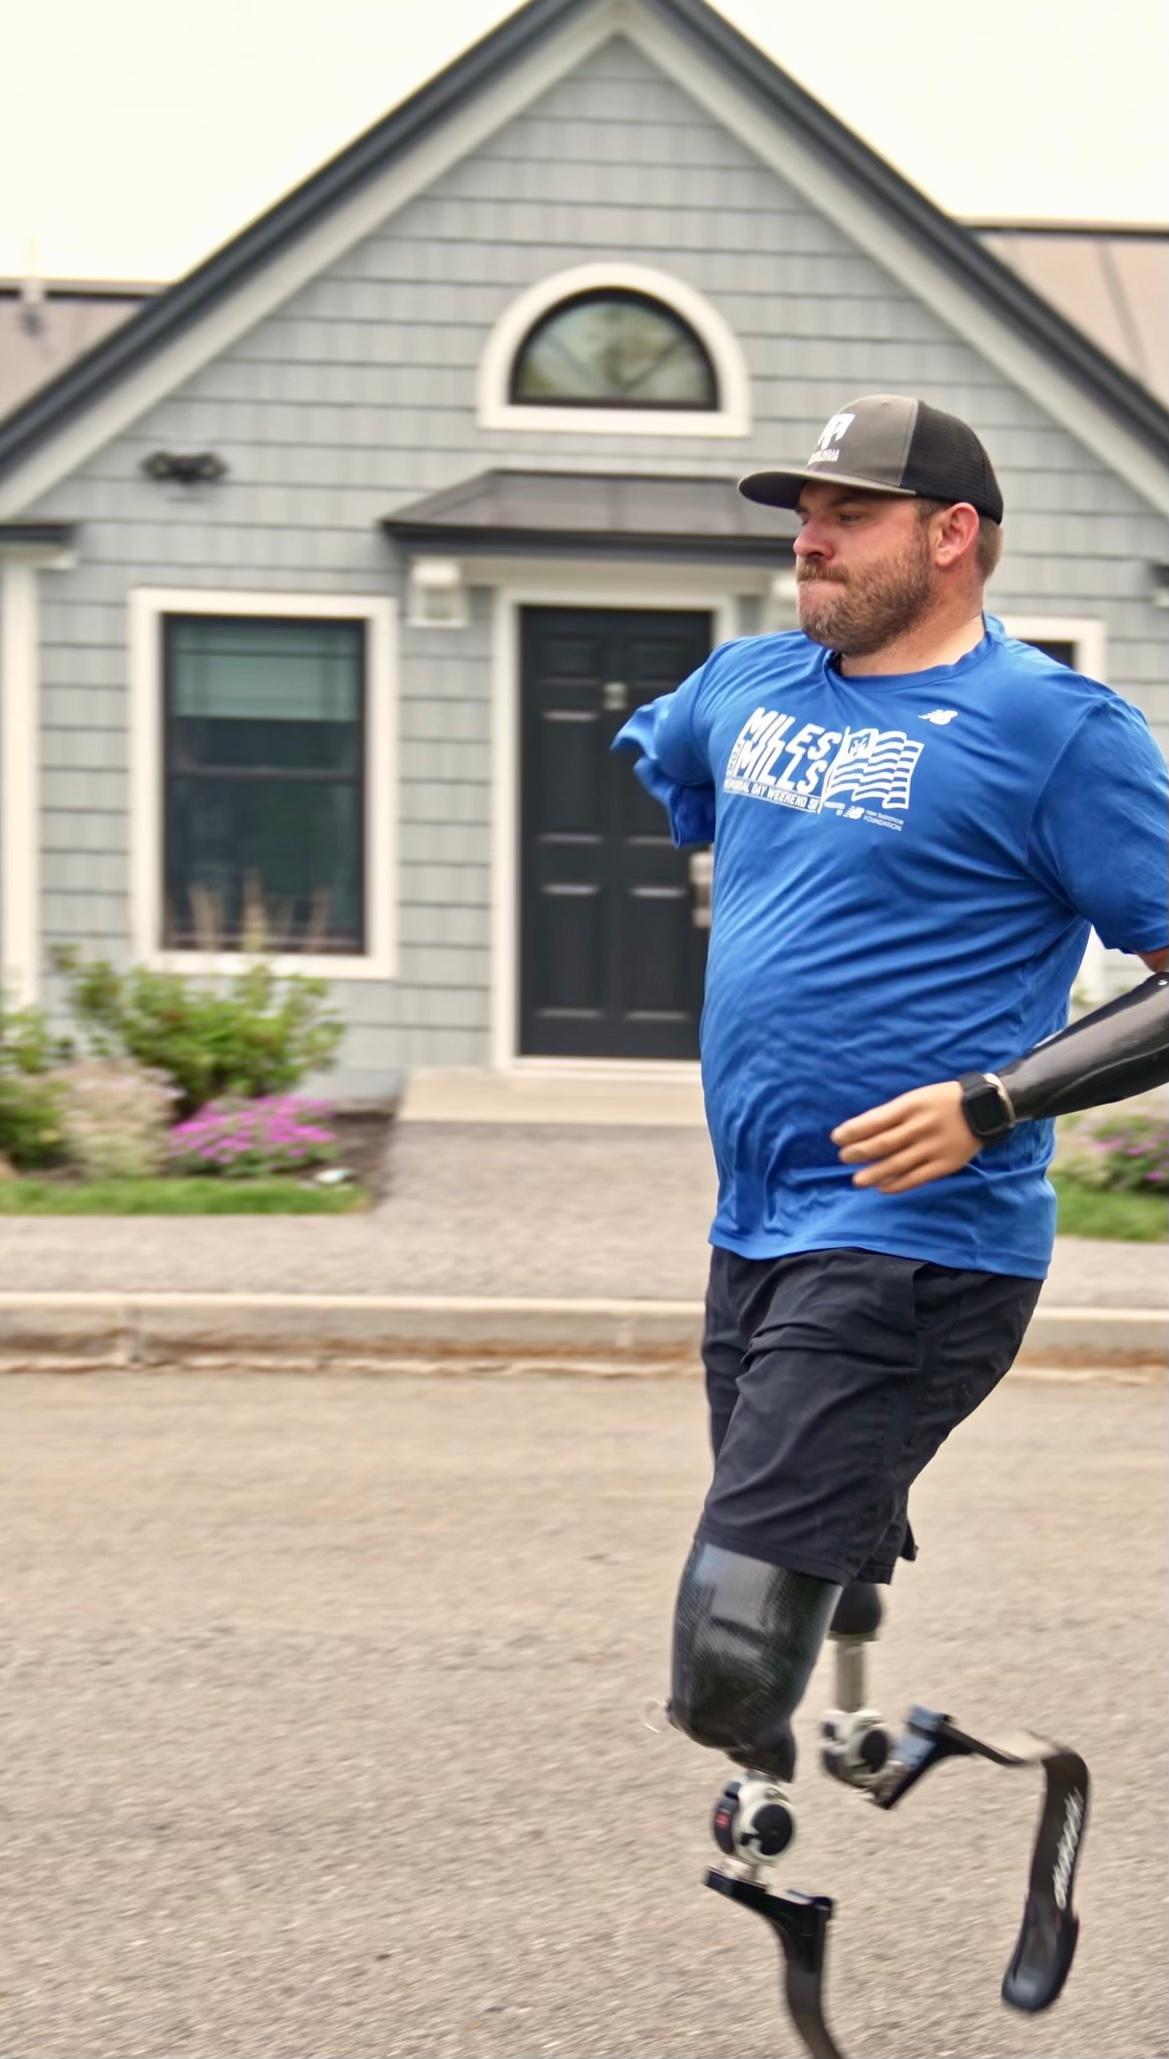 Mr. Mills stays in shape by running. (Courtesy of Travis Mills)